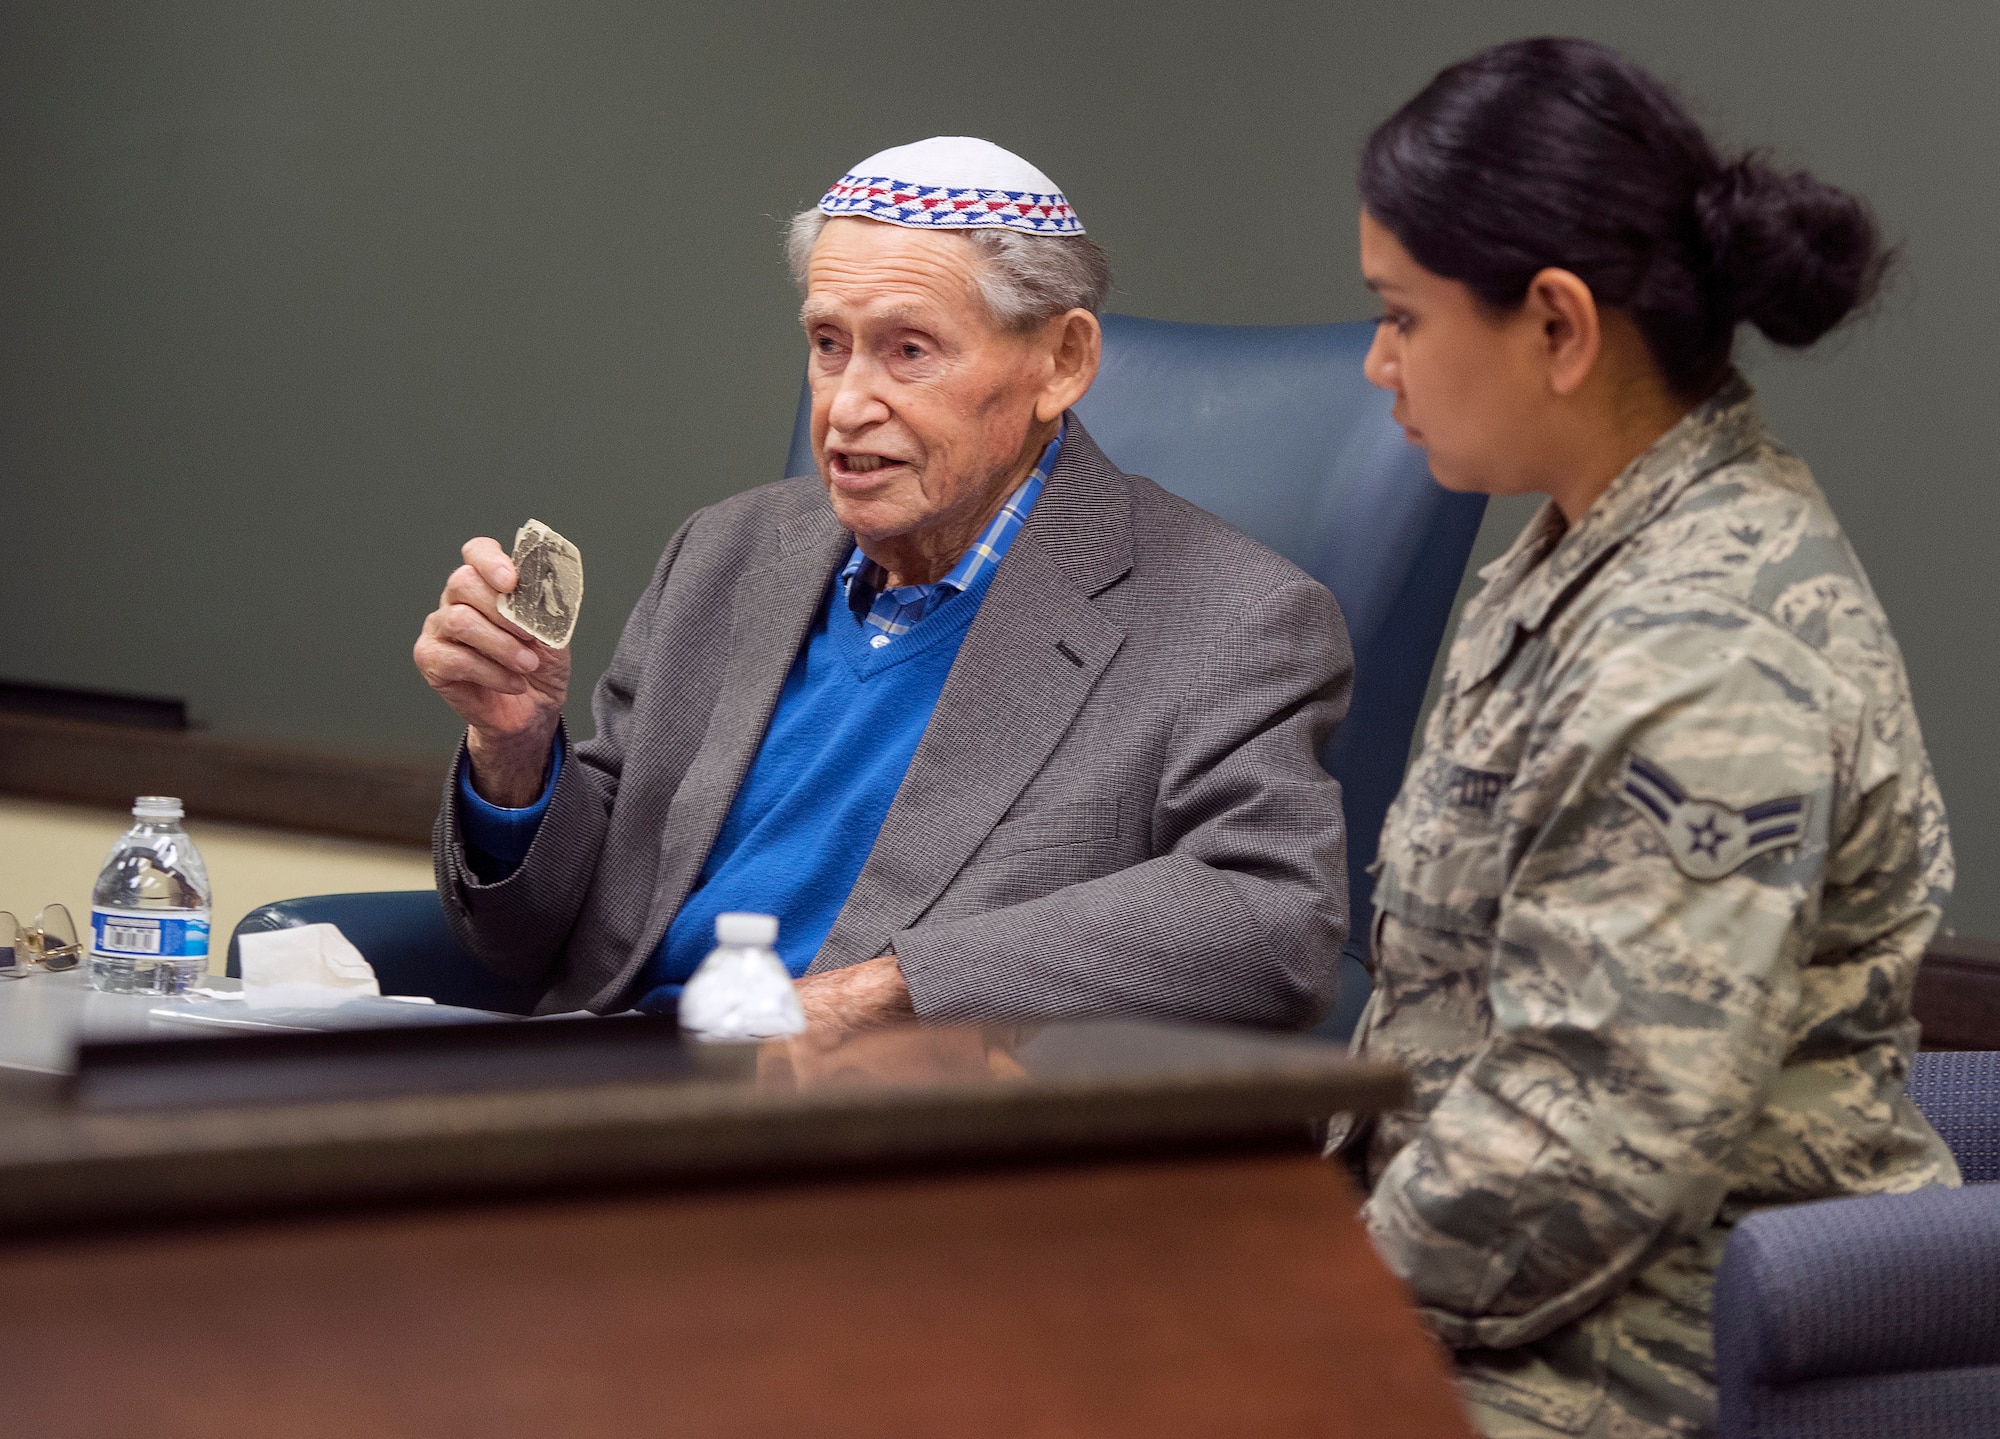 Sam Heider, a Holocaust survivor, holds up a picture of his sister, who was killed by the Nazis, as he talks about his experiences during World War II during a presentation Oct. 19, 2018, at the Air Force Life Cycle Management Center headquarters on Wright-Patterson Air Force Base, Ohio. Heider managed to keep the photo with him and hidden throughout his imprisonment in German concentration camps. It is the only photo he has of any of his family members who all died in the Holocaust. (U.S. Air Force photo by R.J. Oriez)